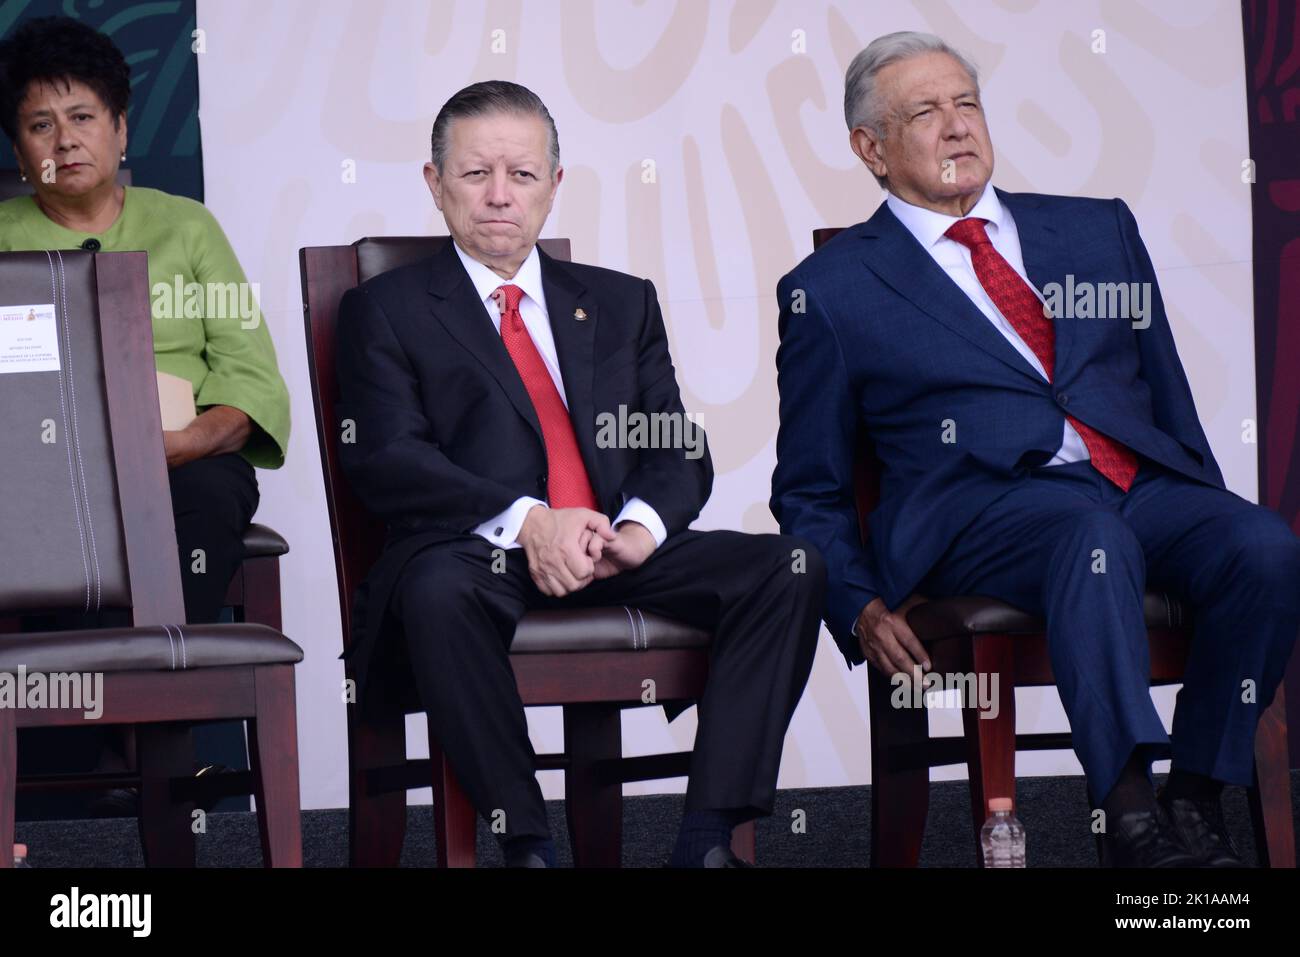 Mexico City, Mexico. 16th Sep, 2022. Mexico's President Andres Manuel Lopez Obrador accompanied by and president of the Supreme Court of Justice Arturo Zaldivar during the ceremony of the civic-military parade as part of the commemoration of the 212th Anniversary of the beginning of Mexico's Independence in the downtown. on September 16, 2022 in Mexico City, Mexico. Credit: ZUMA Press, Inc./Alamy Live News Stock Photo